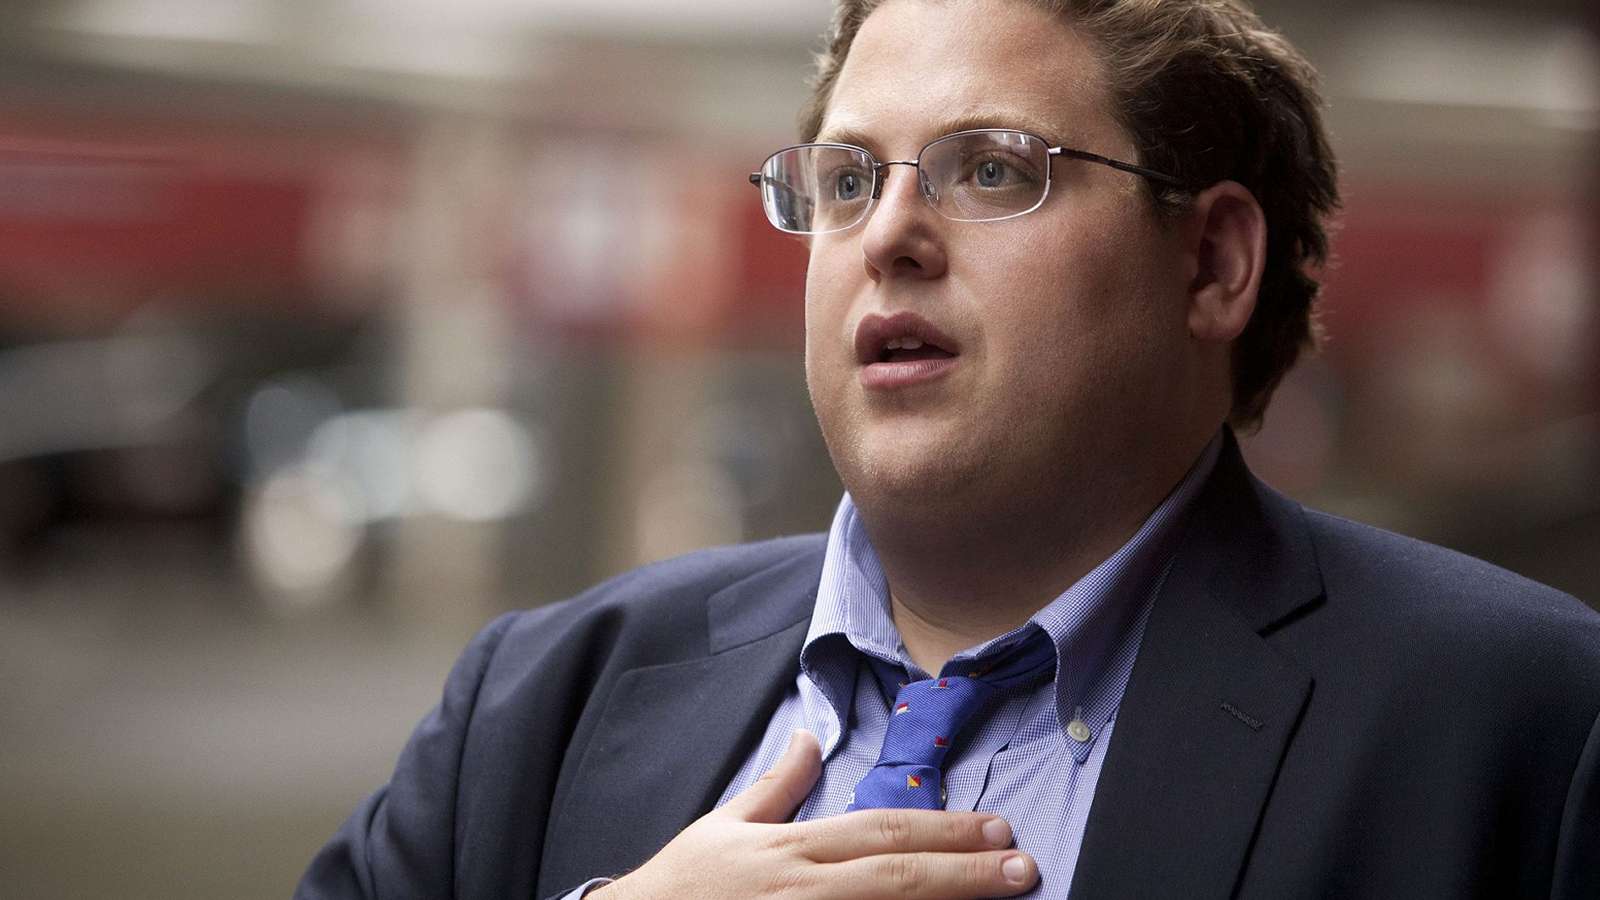 Jonah Hill’s lawyer claims complete fabrication in light of new predatory accusations